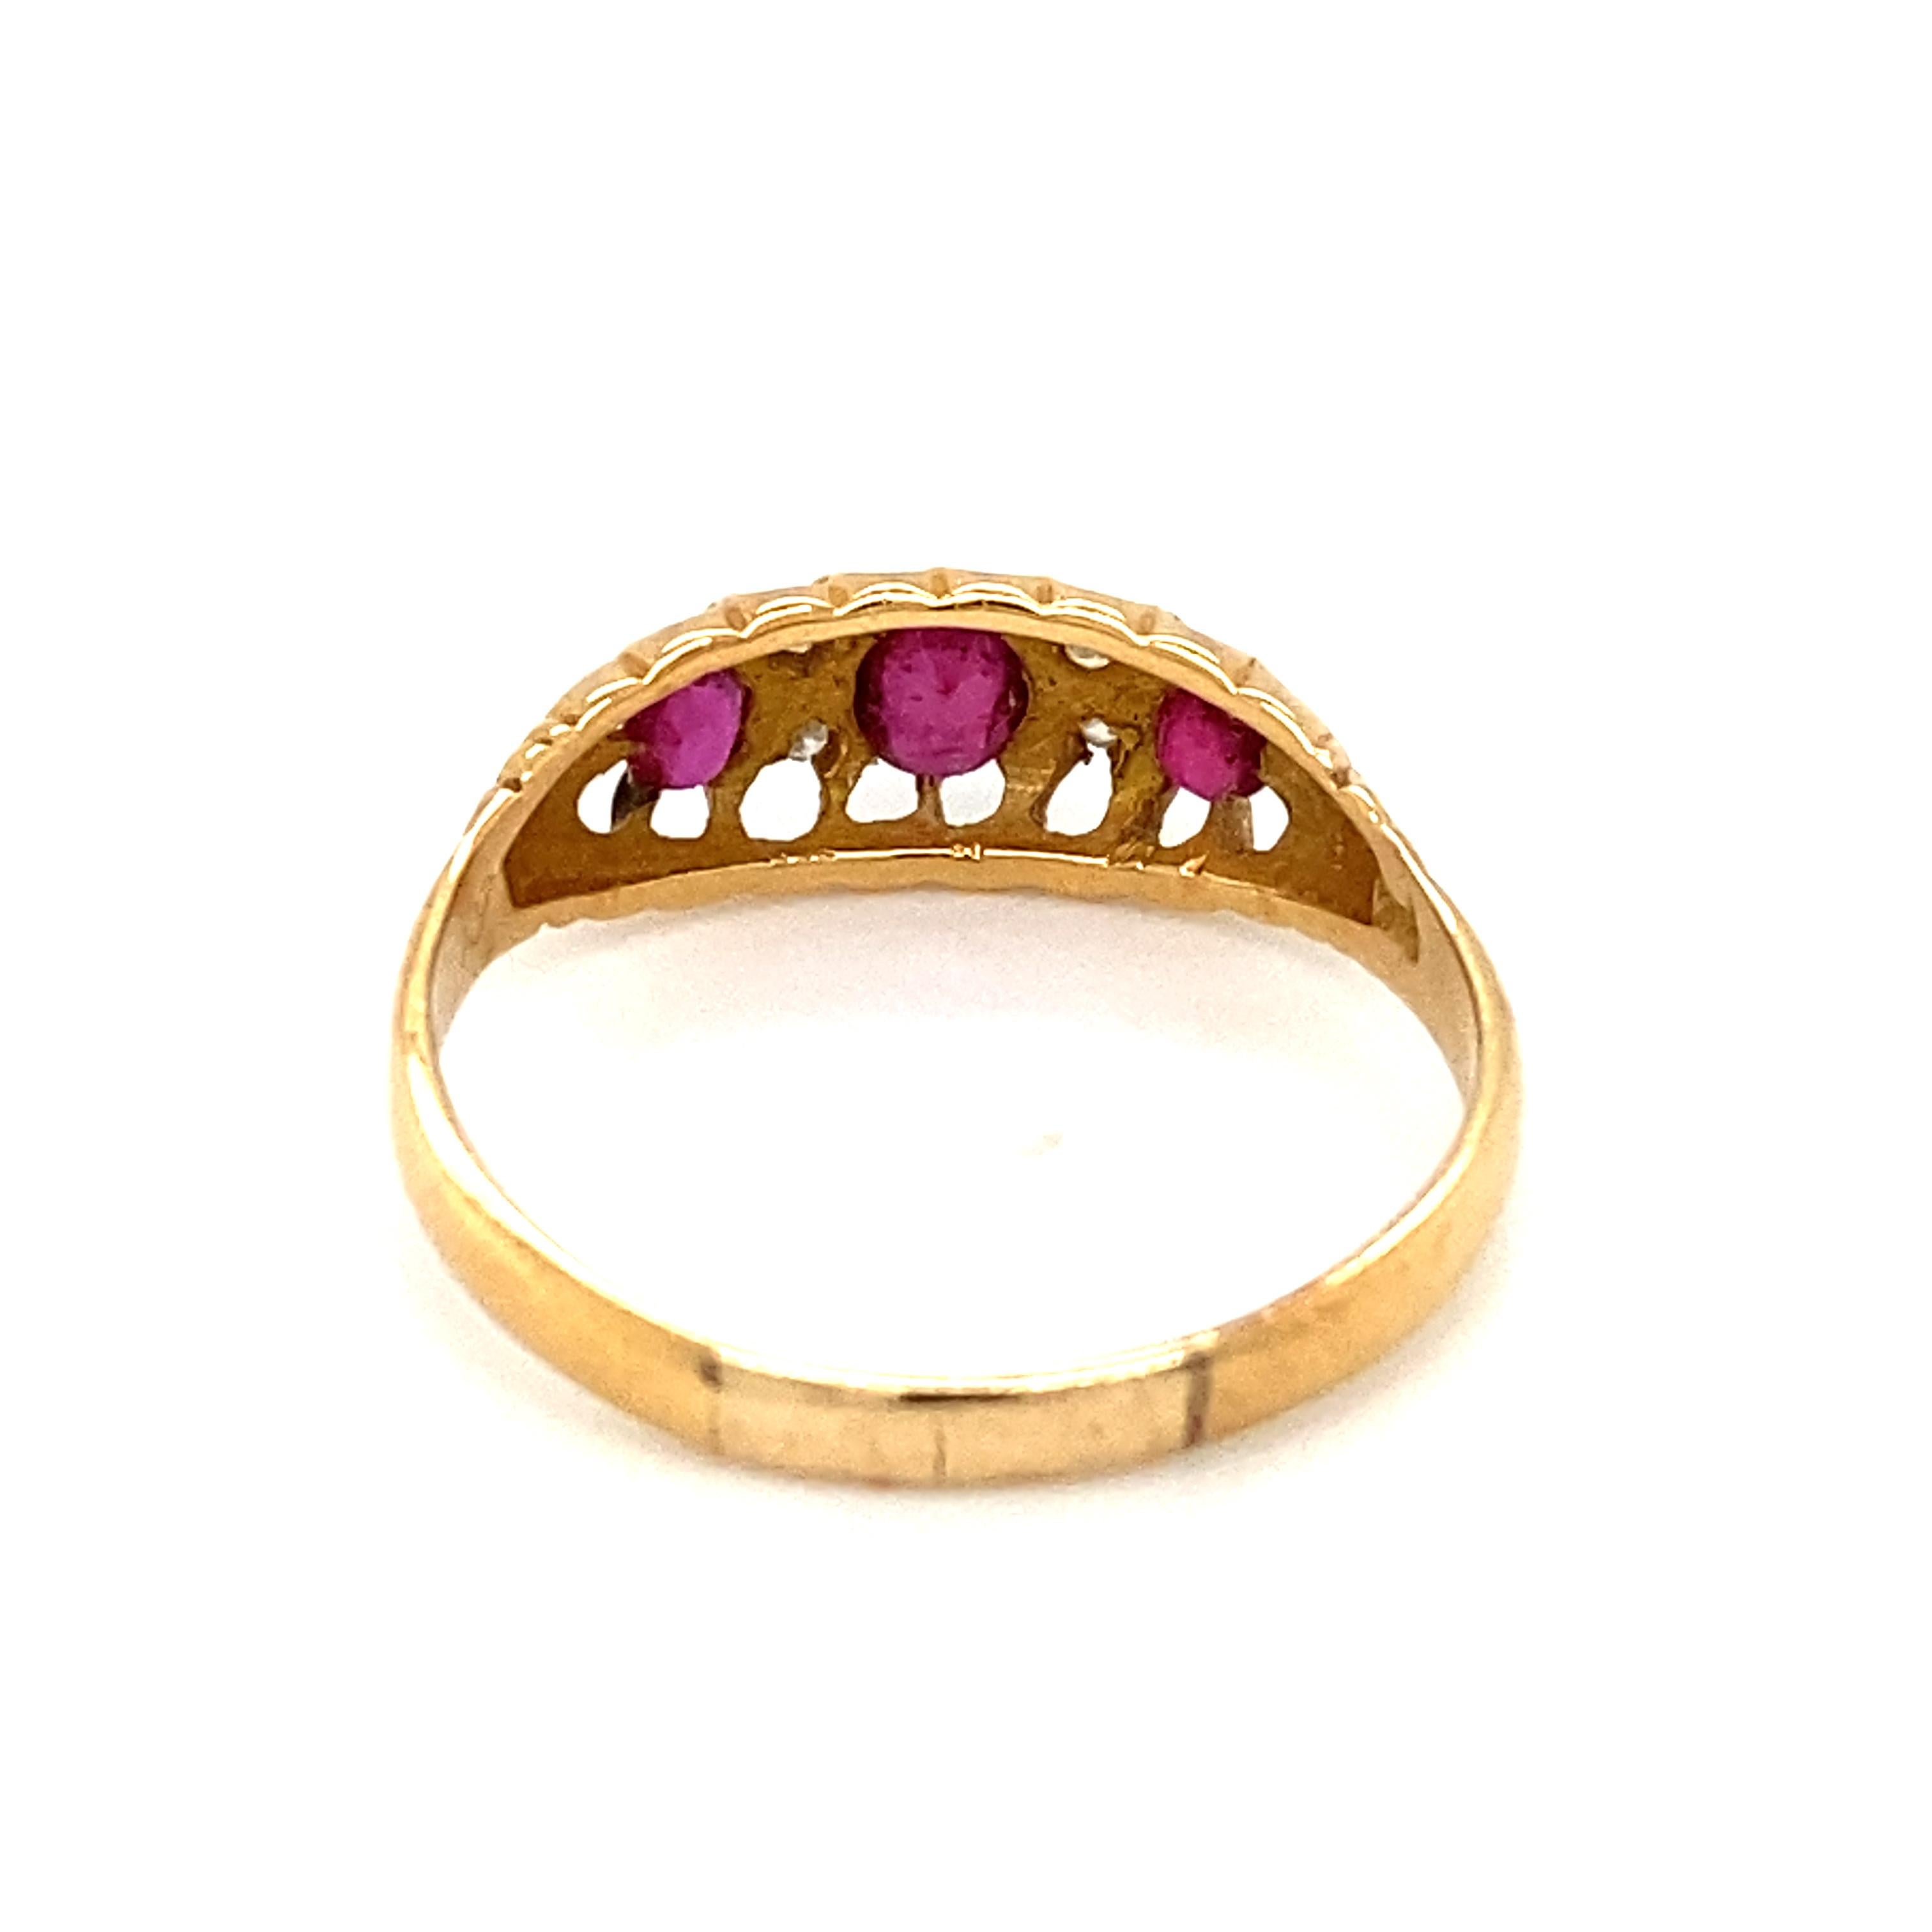 Item Details: This antique ring with oval rubies and accent diamonds is a beautiful Edwardian piece with many vintage motifs. With three bright red rubies, this ring is an excellent quality example of Edwardian design.

Circa: 1910s
Metal Type: 14k